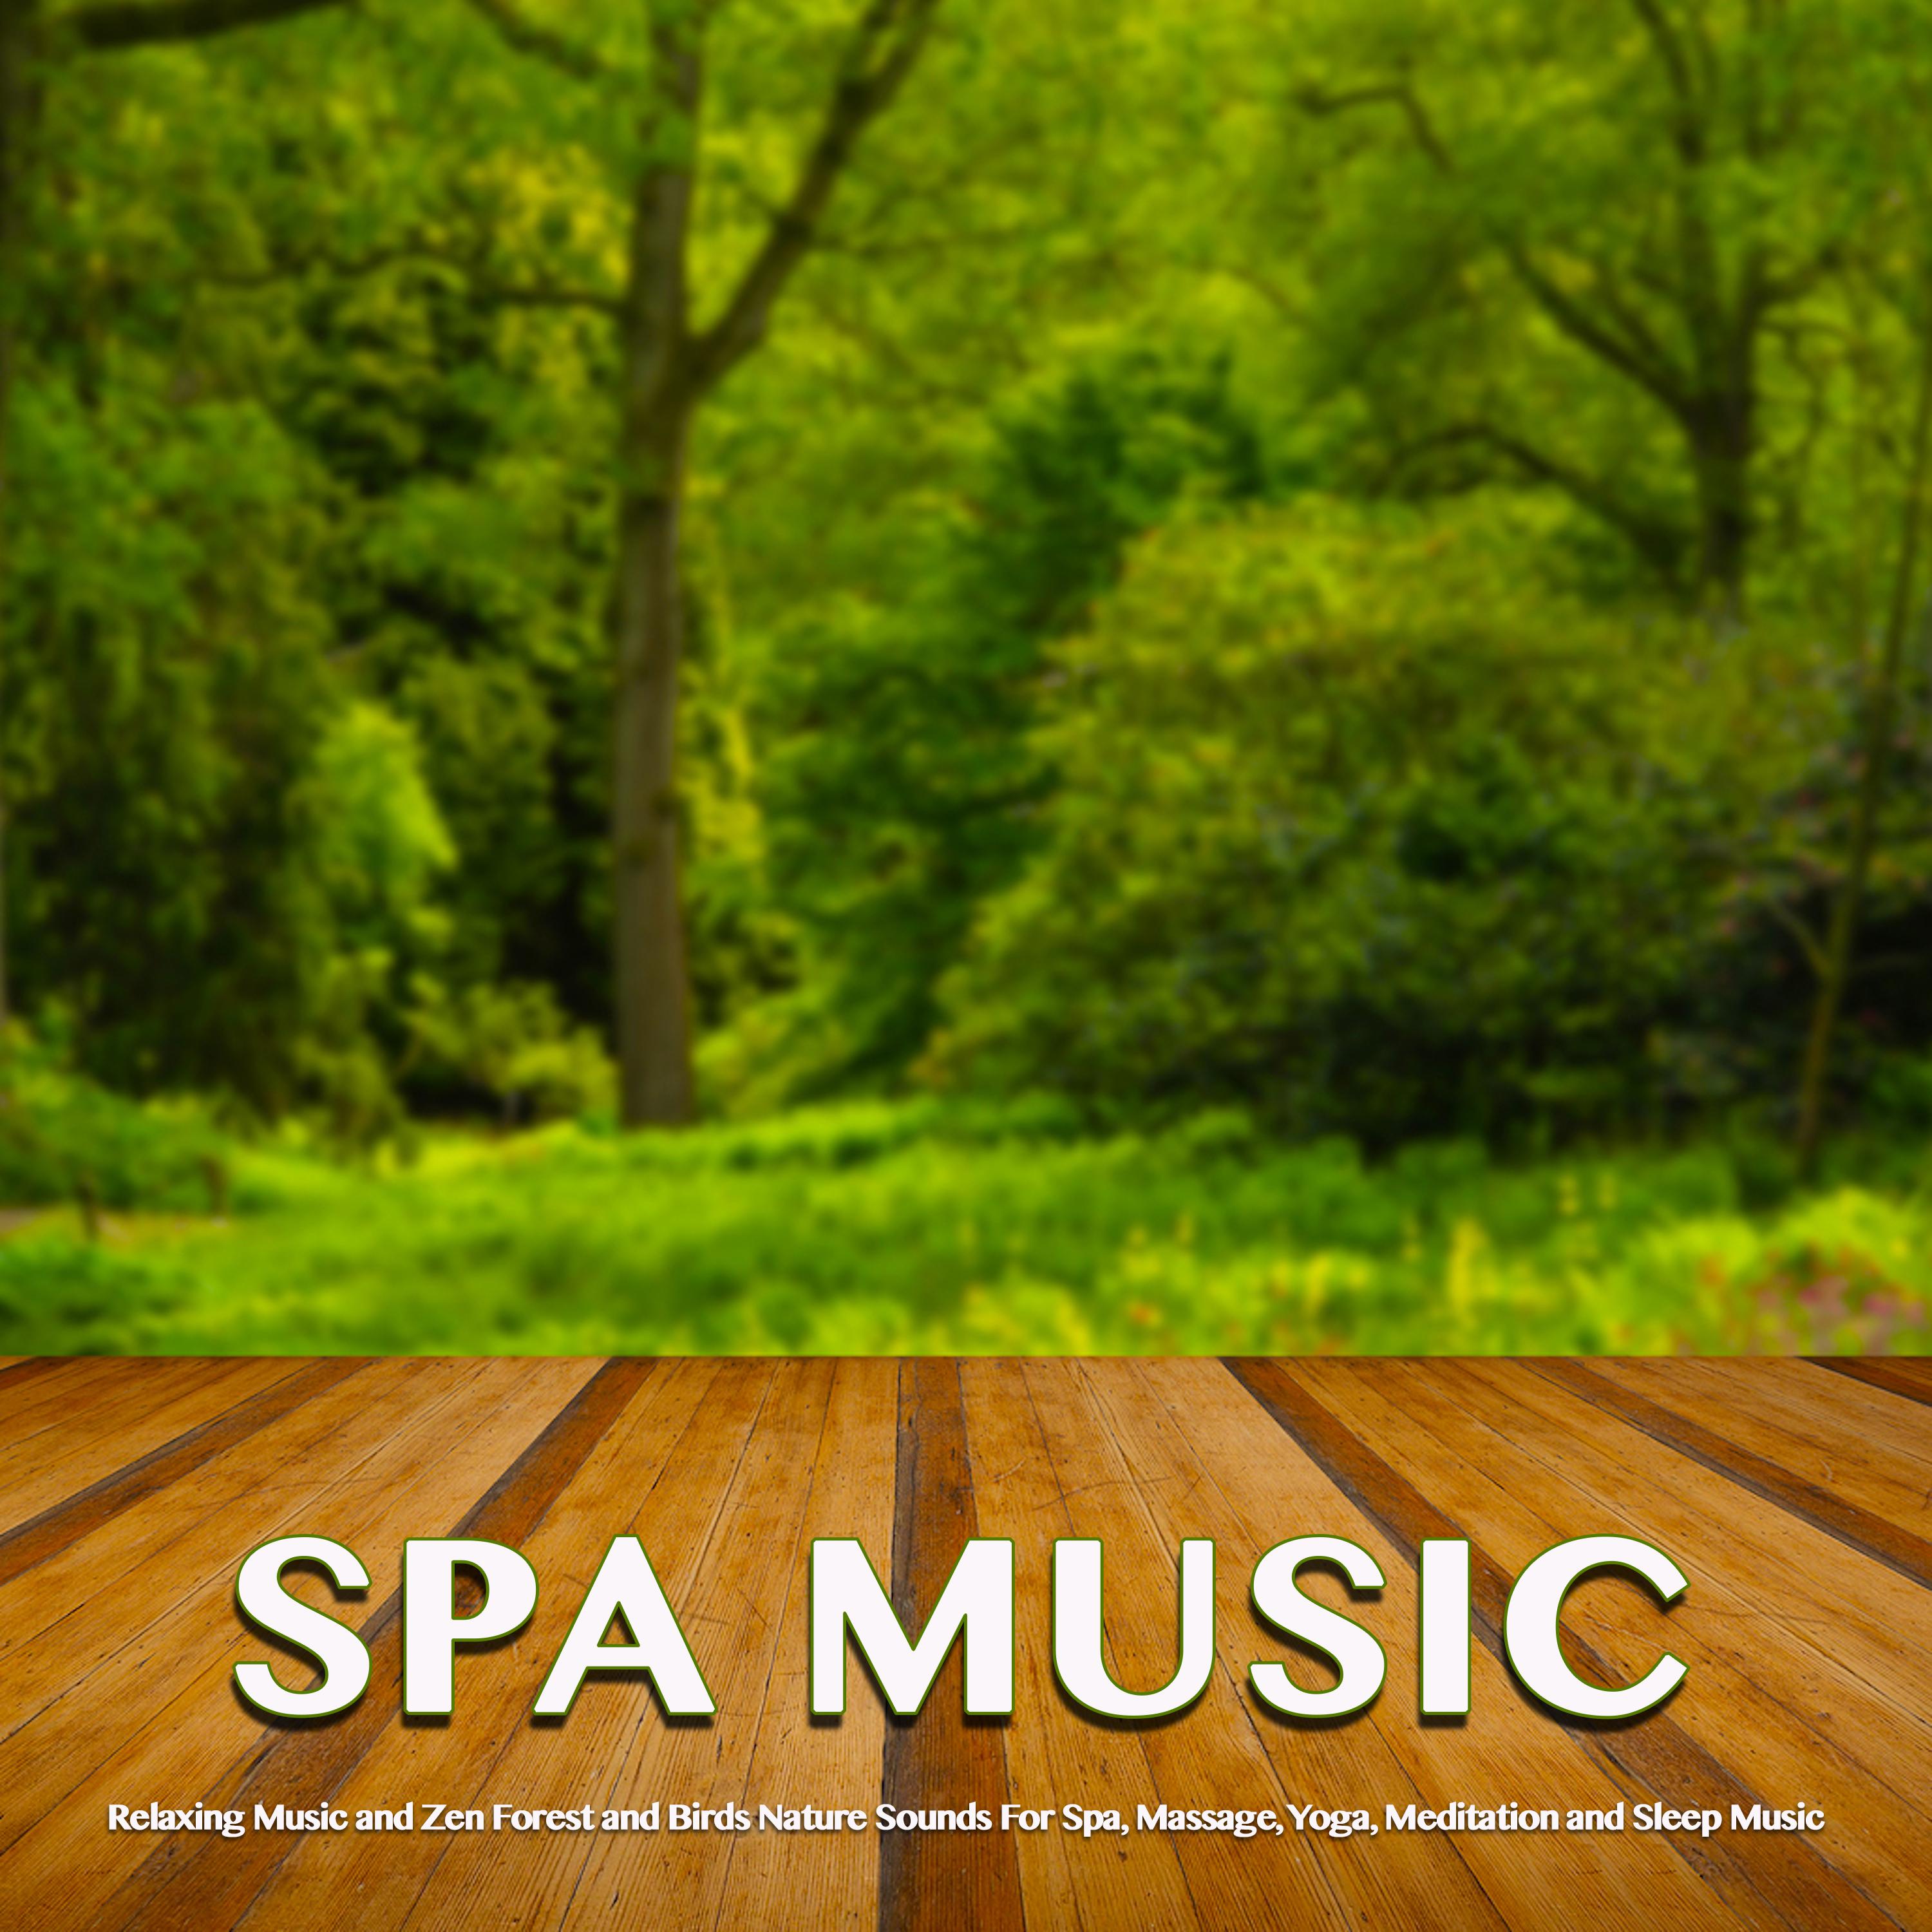 Relaxing Music and Bird Sounds For Spa